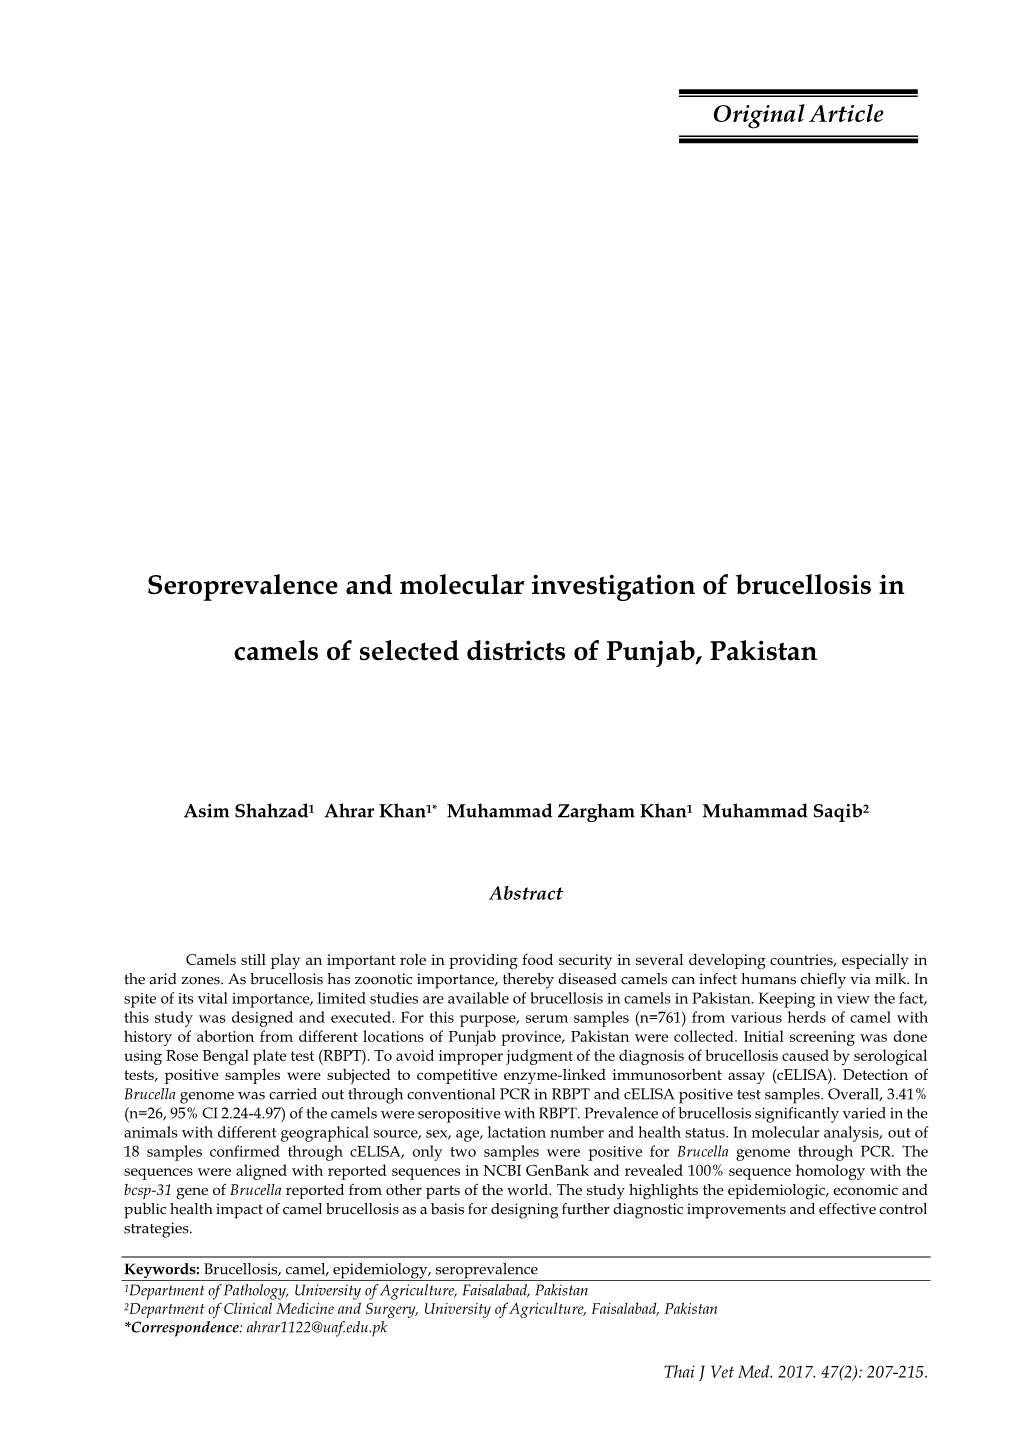 Seroprevalence and Molecular Investigation of Brucellosis In